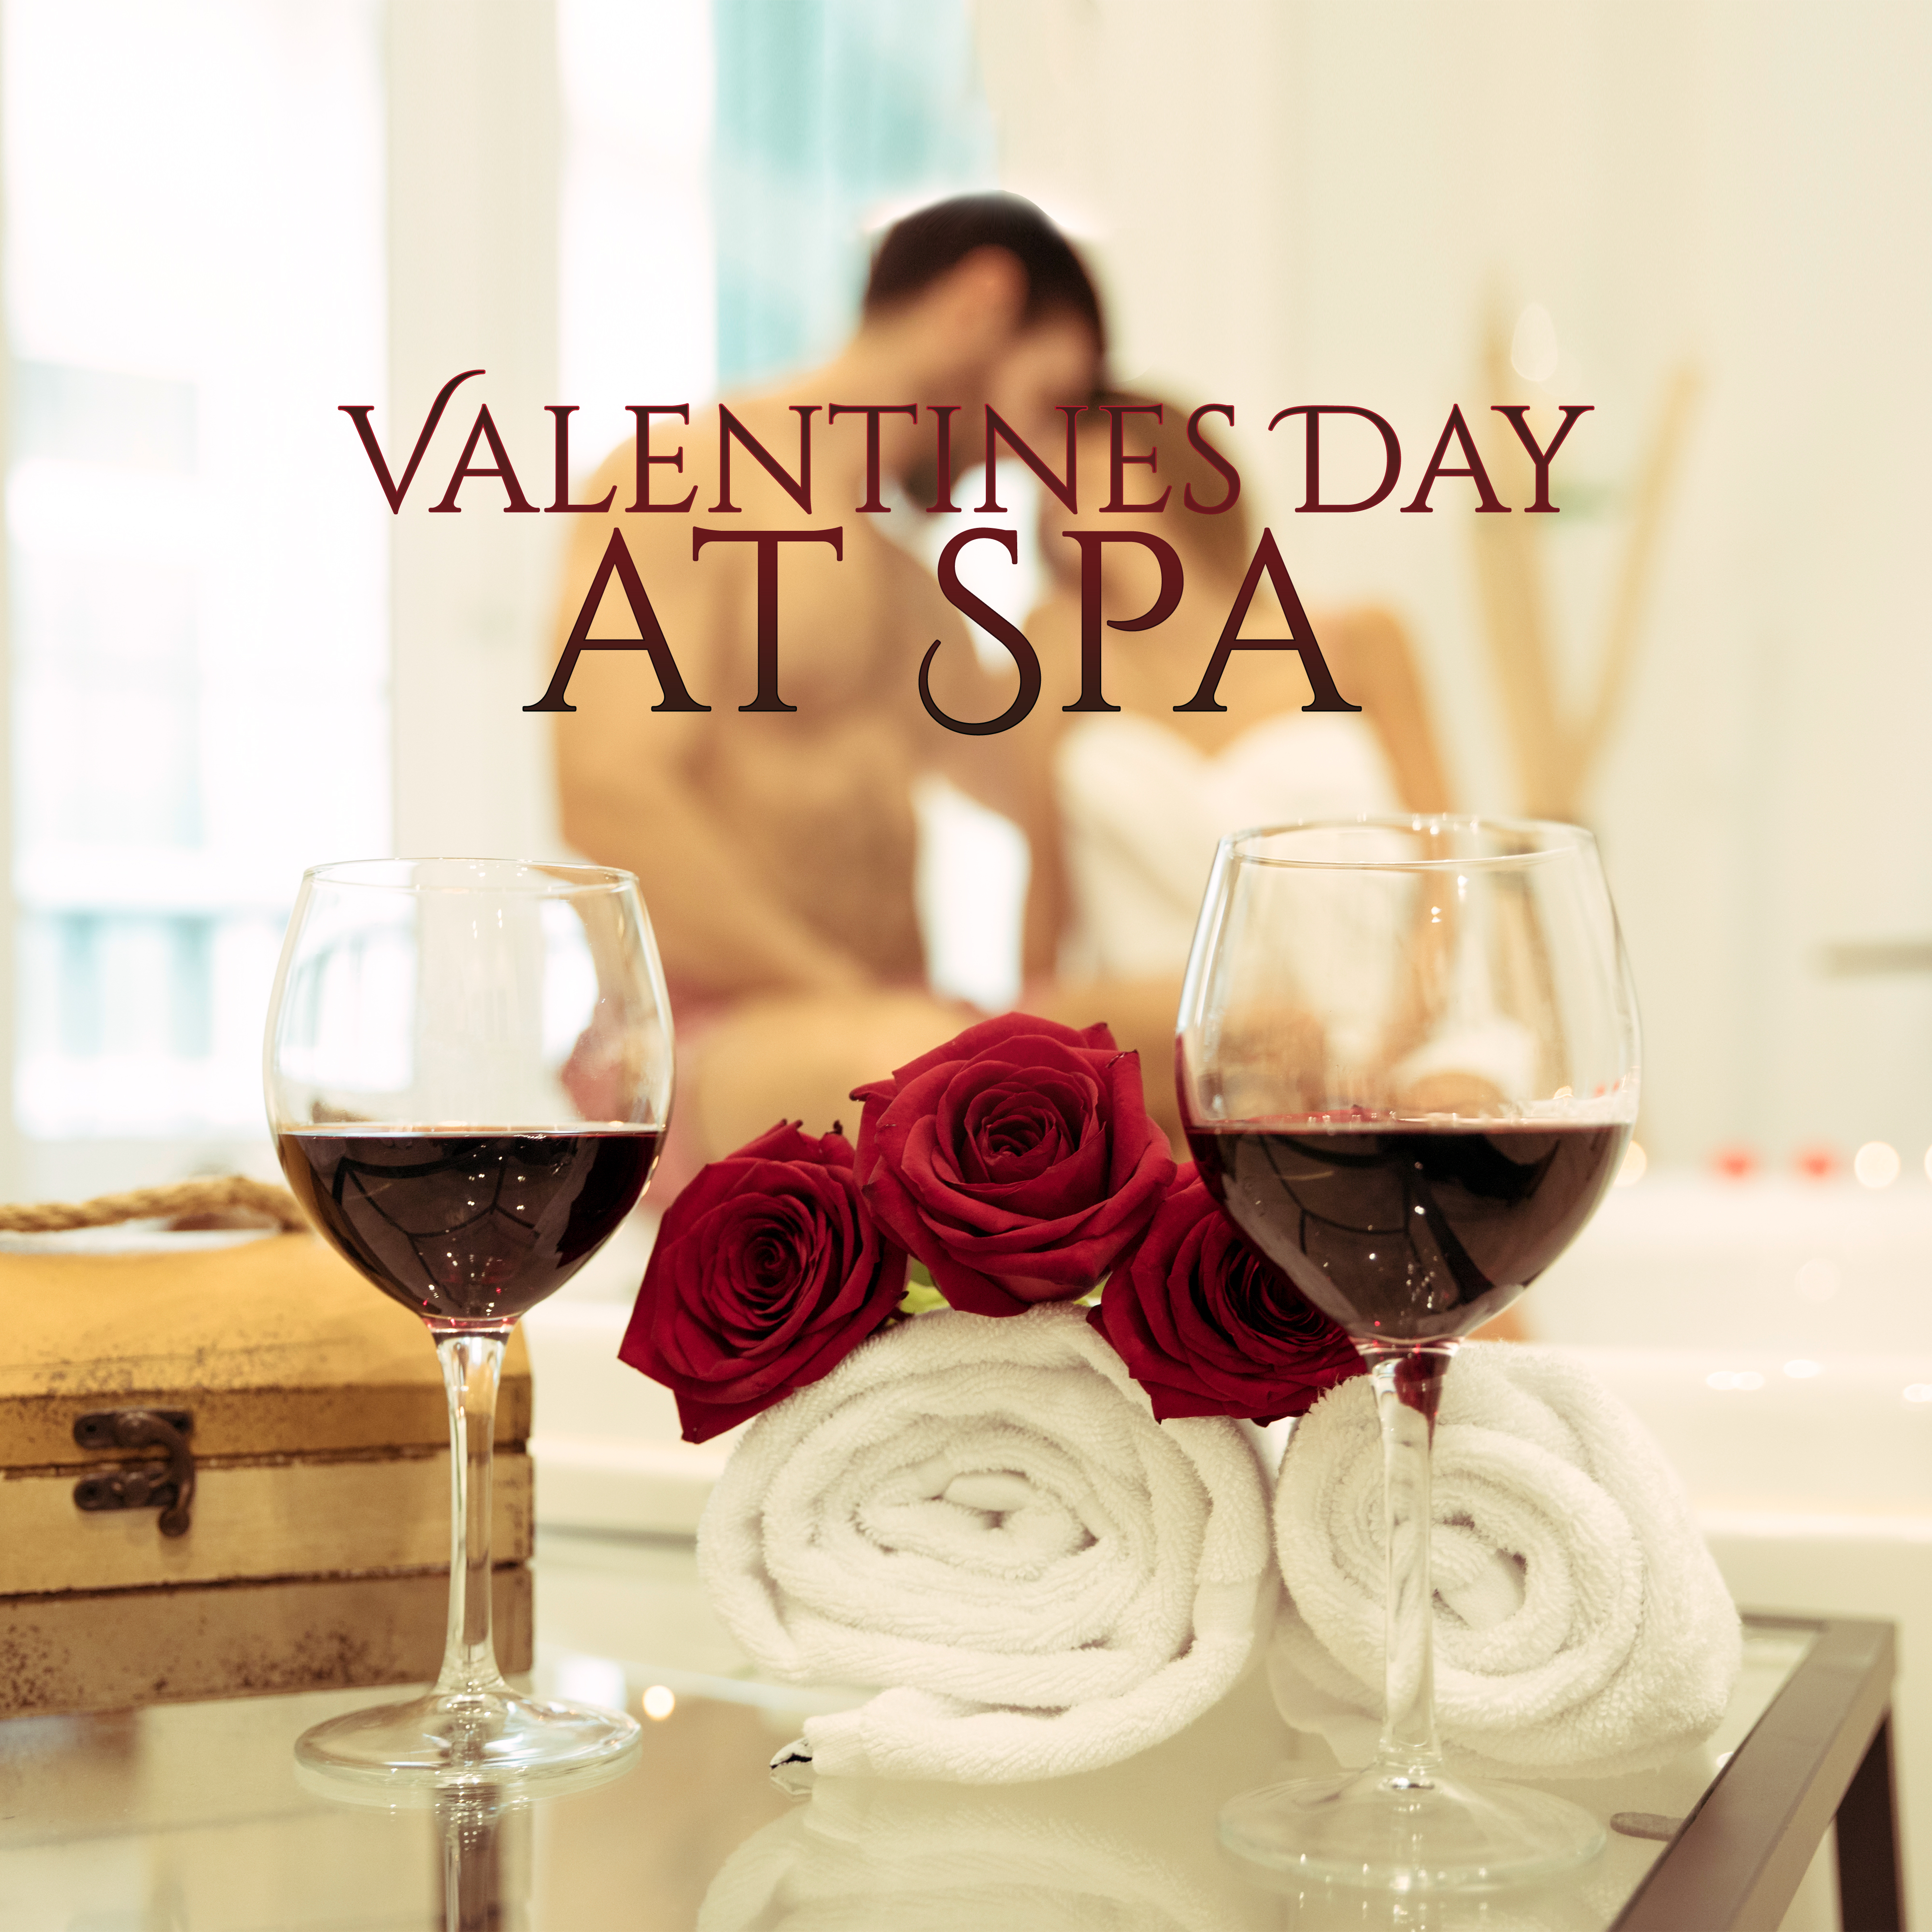 Valentines Day at Spa – Romantic Music for Relaxation, Sleep, Spa, Wellness, Tantric Massage, Zen Spa, Sensual Massage Music